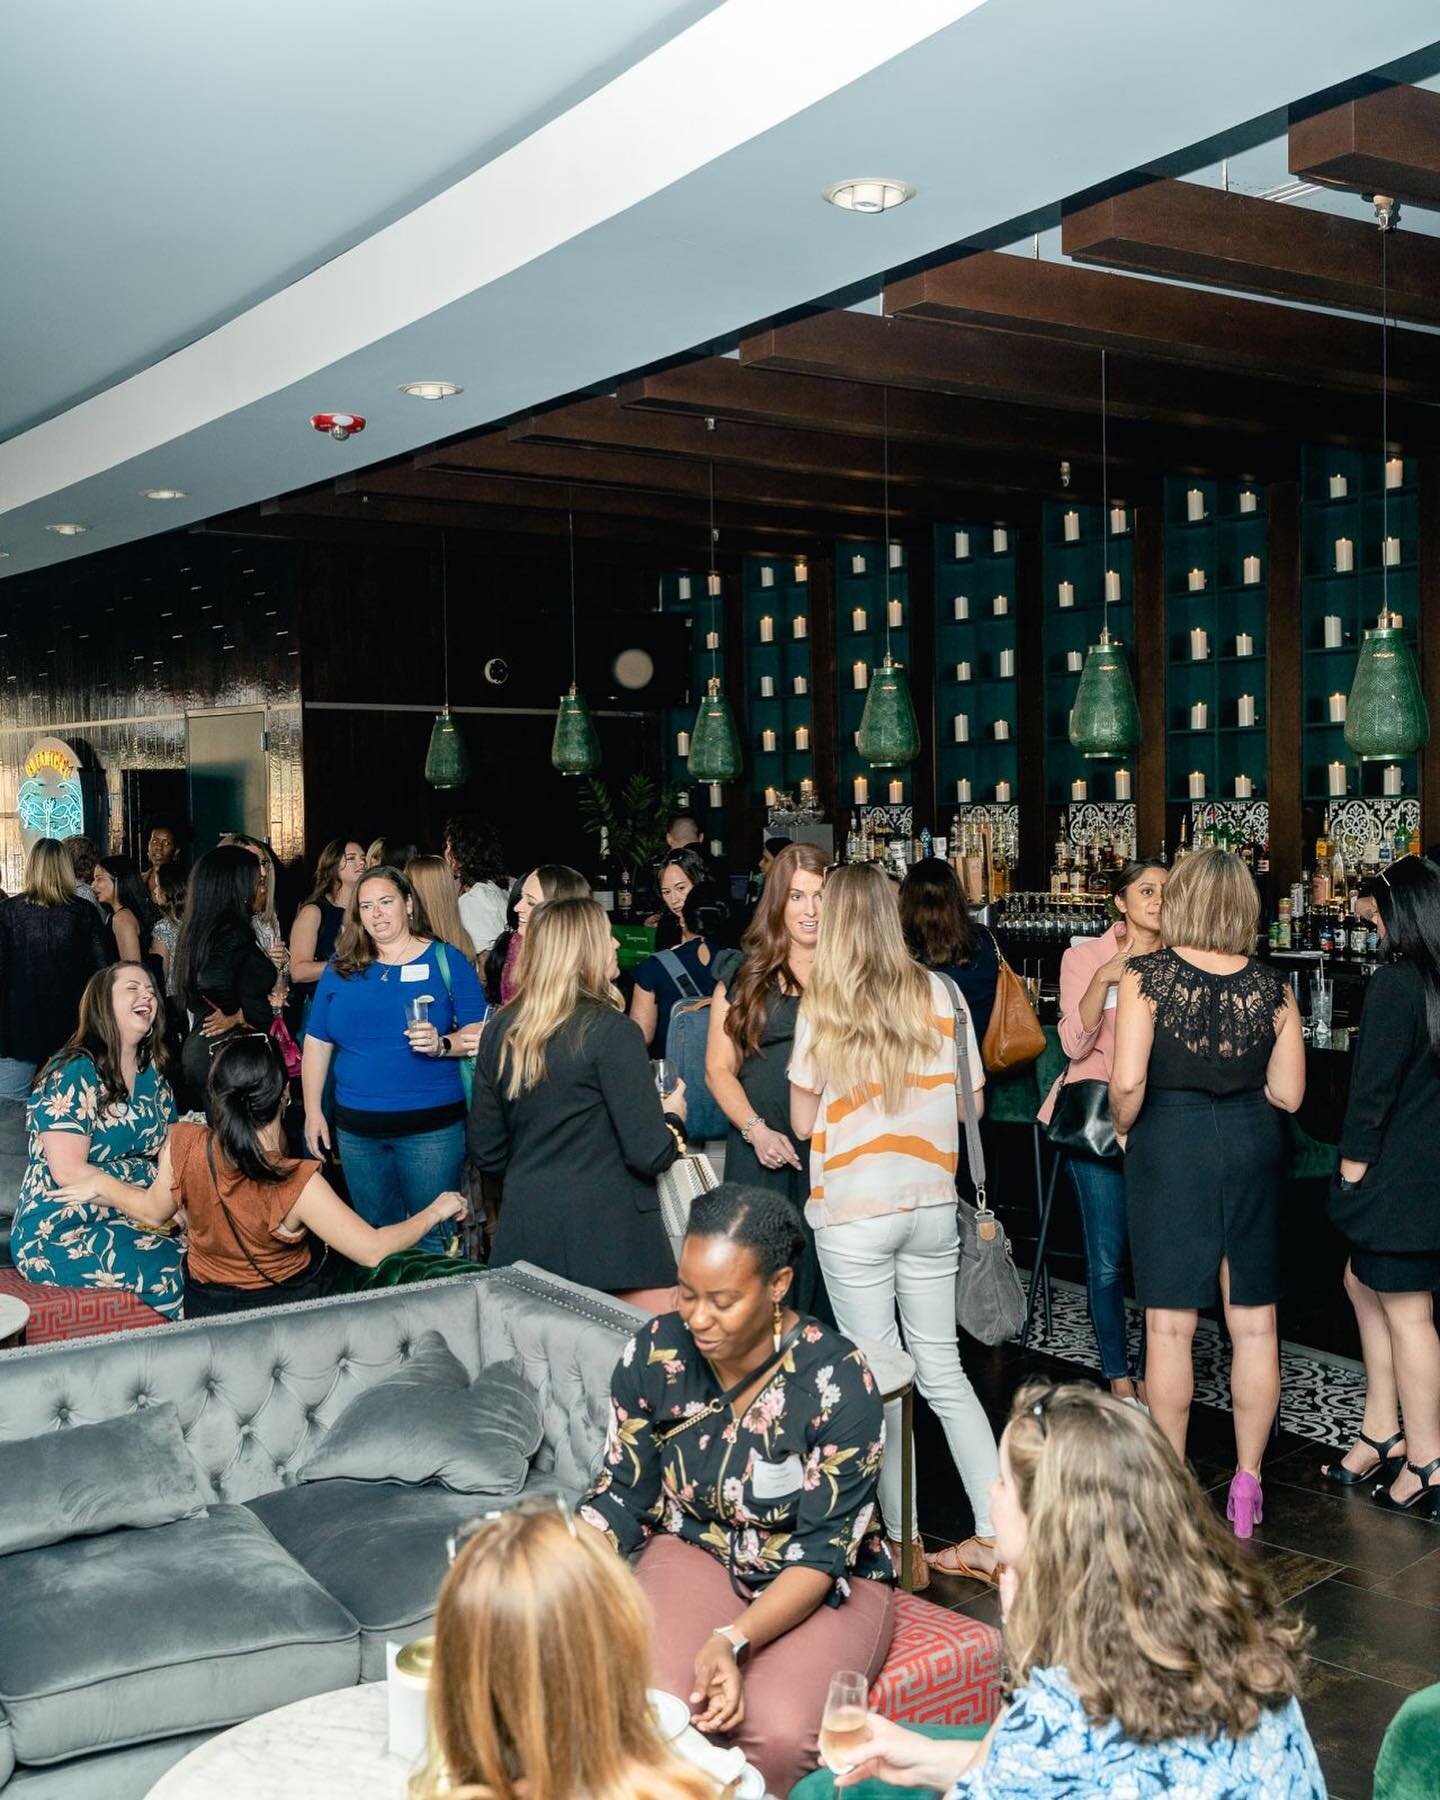 What do you get when you mix together delicious cocktails, inspiring women, and a vibrant community? The answer is last week's unforgettable event at the Botanical Lounge in Raleigh, NC!

Over 70 Linking Pharma Women came together to share impactful 